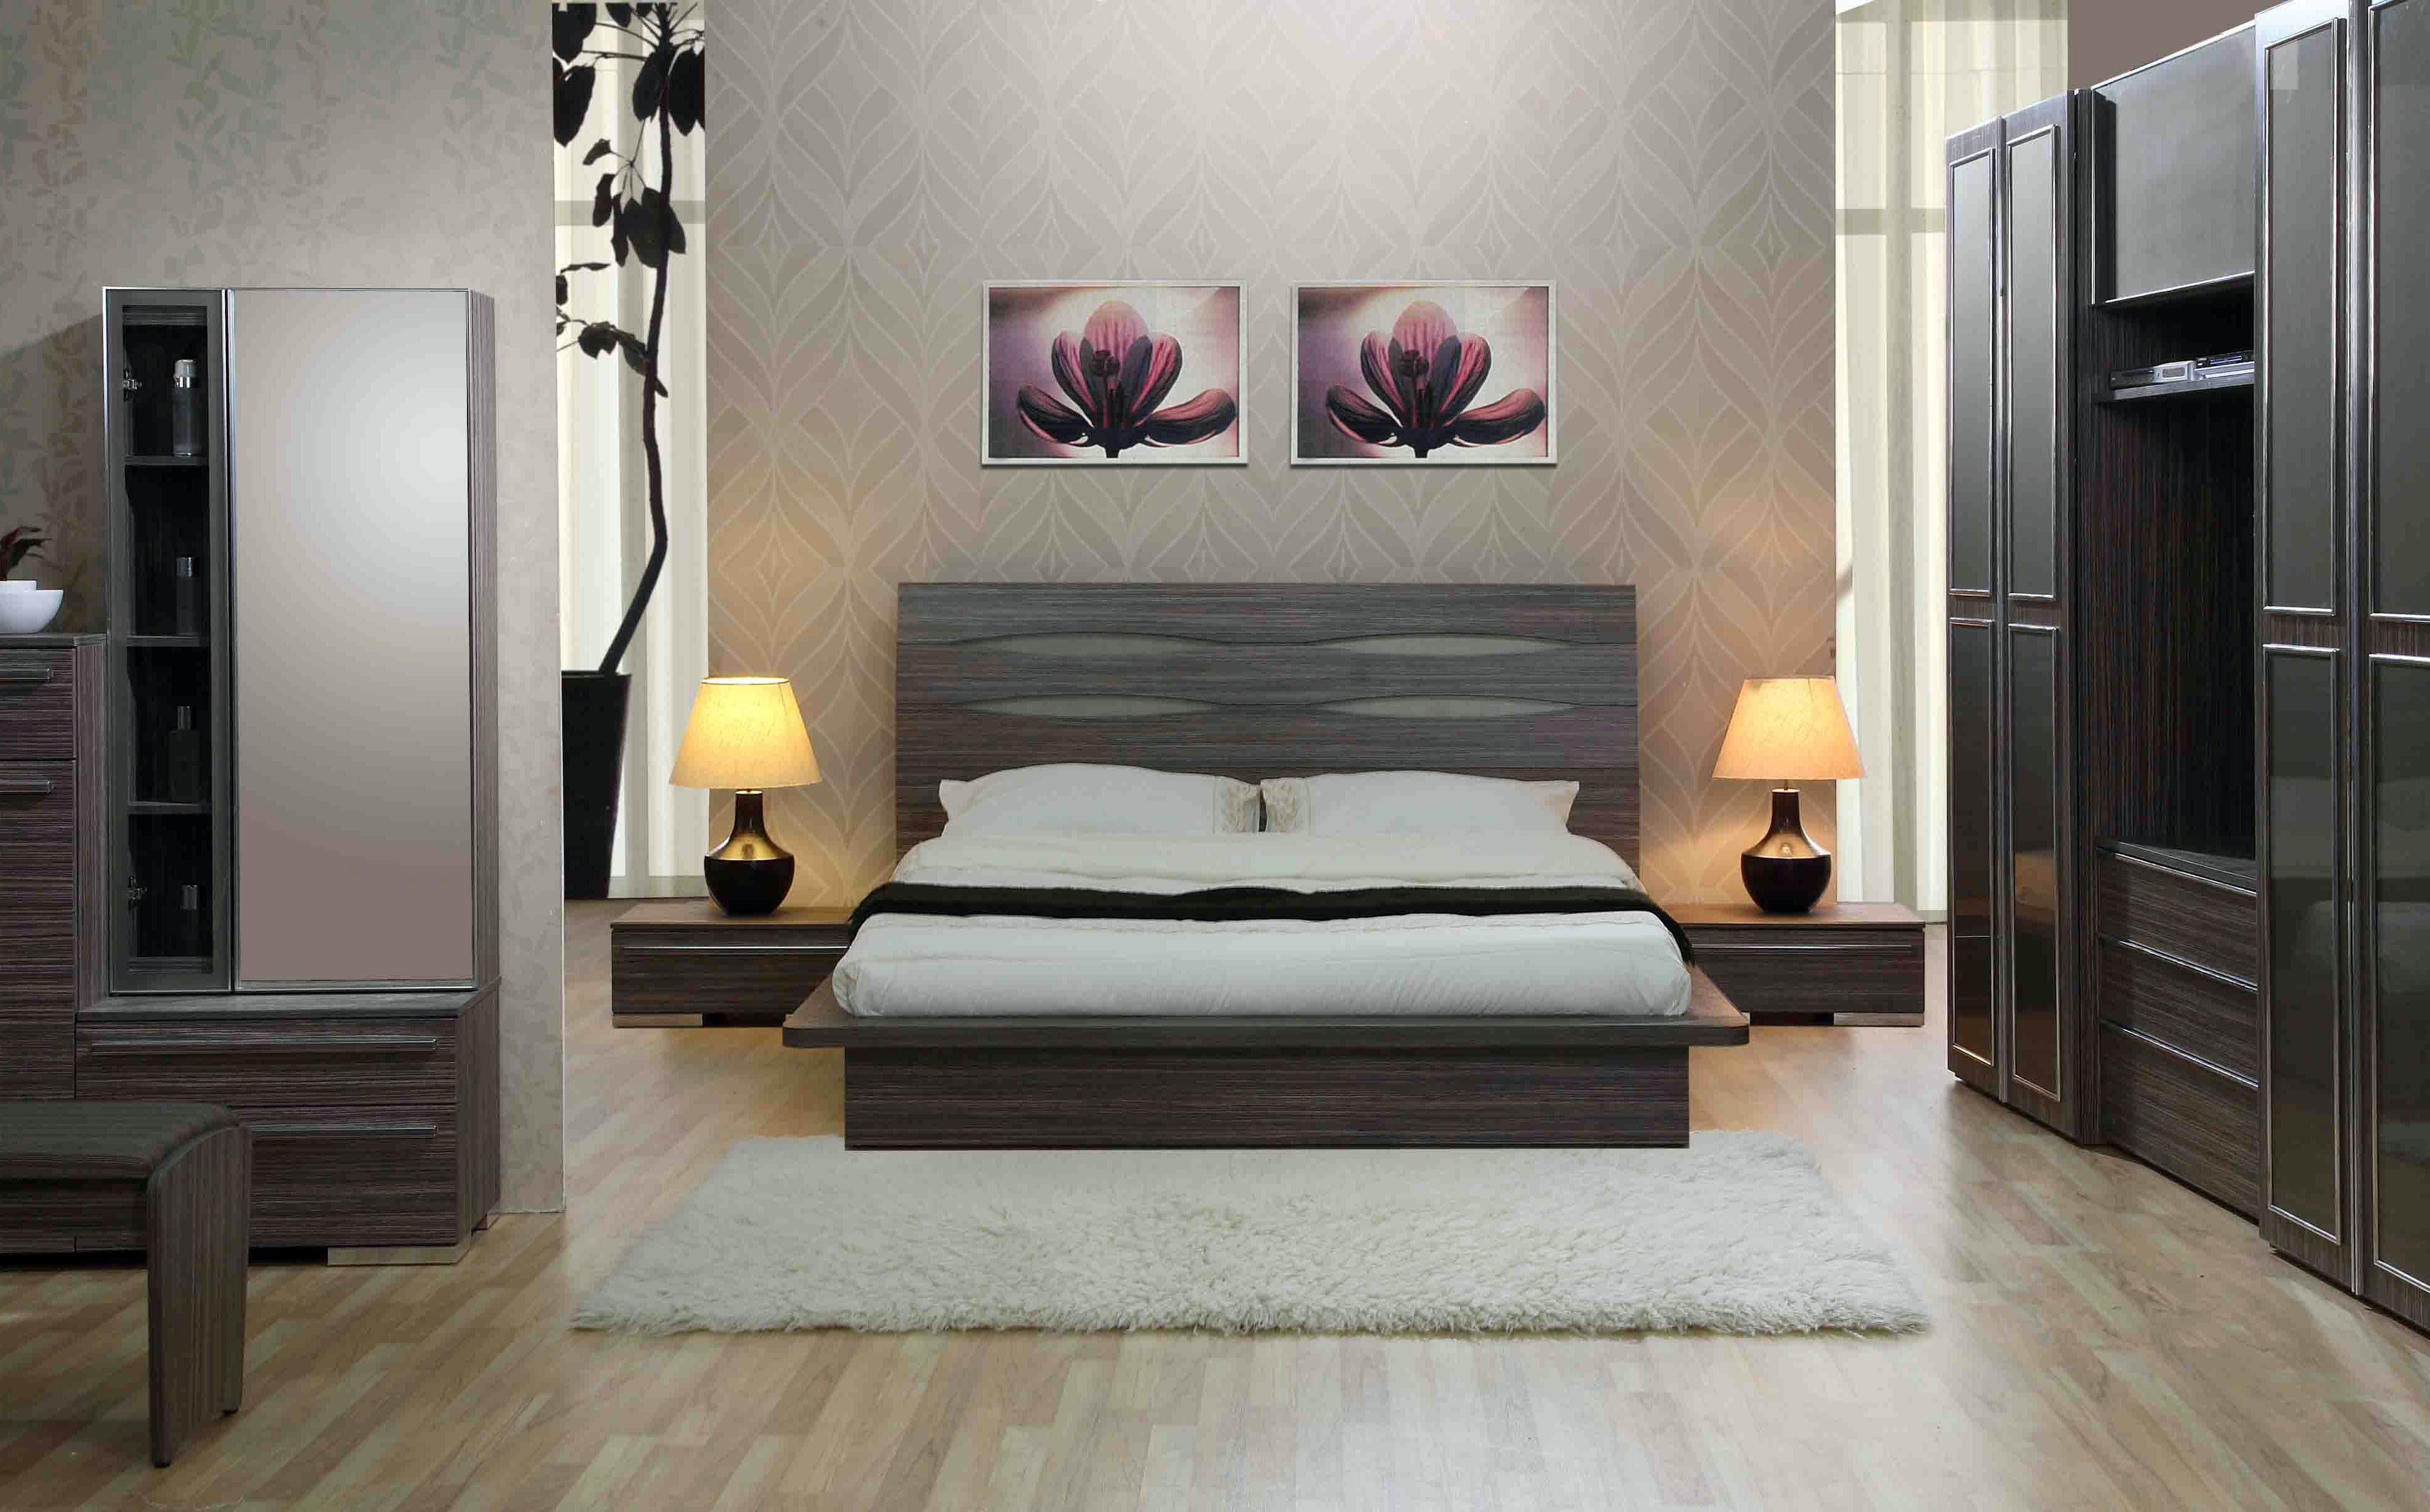 Purple Lotus Photo Wall Decoration Mixed With Vintage Black Wooden Closet And Deluxe Platform Bed (Photo 2647 of 7825)